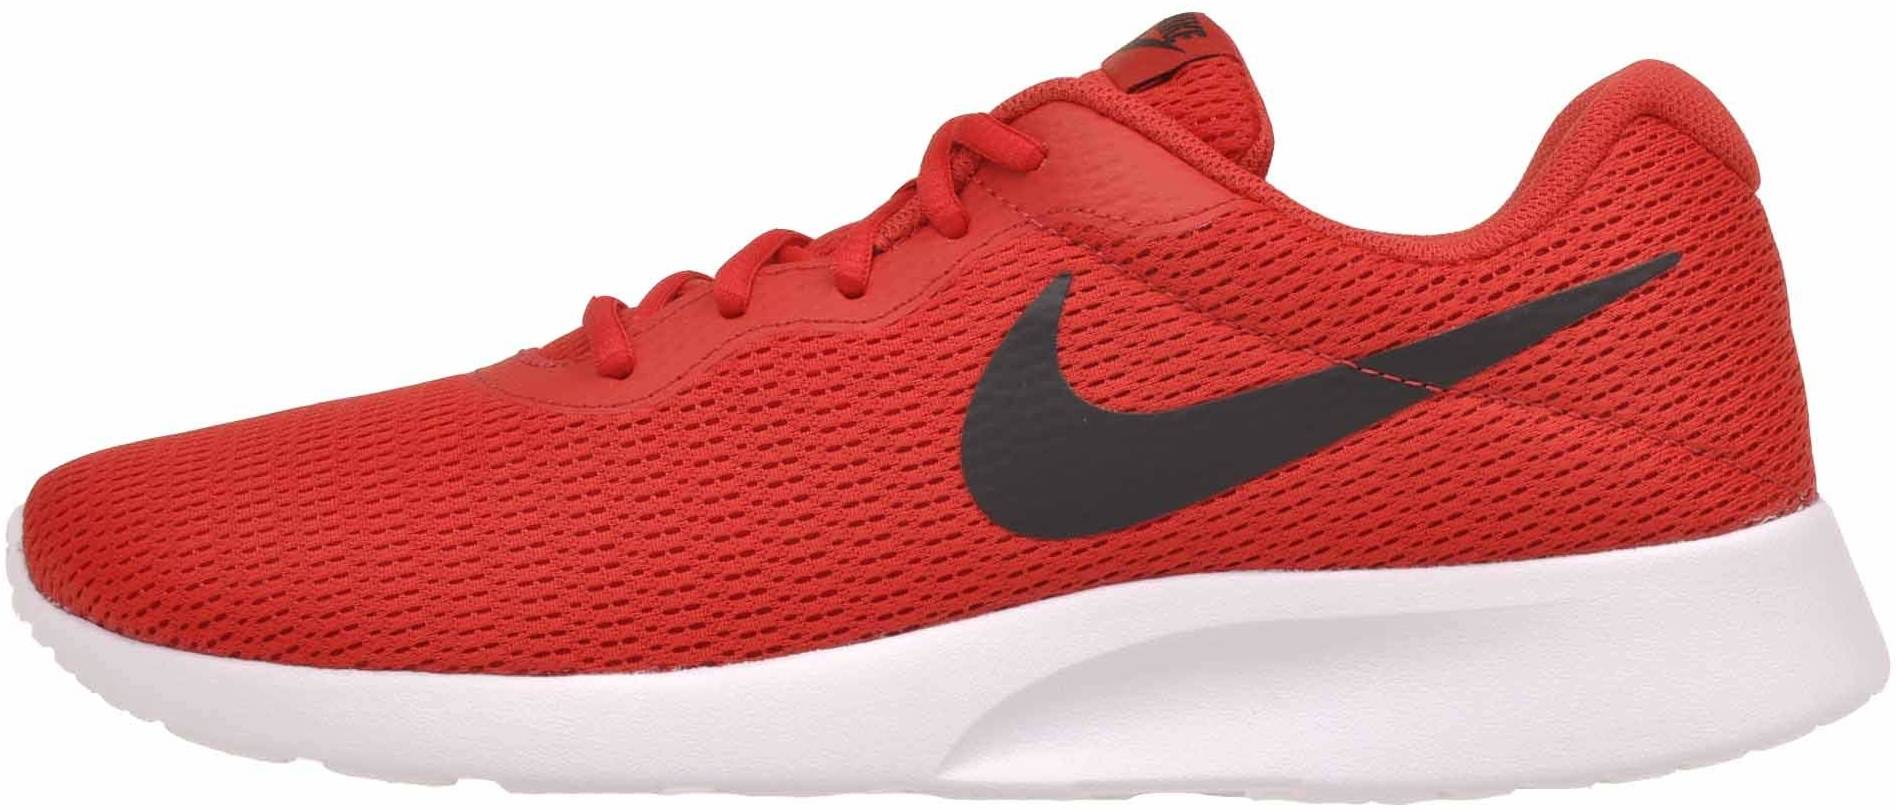 mens red and white nike shoes